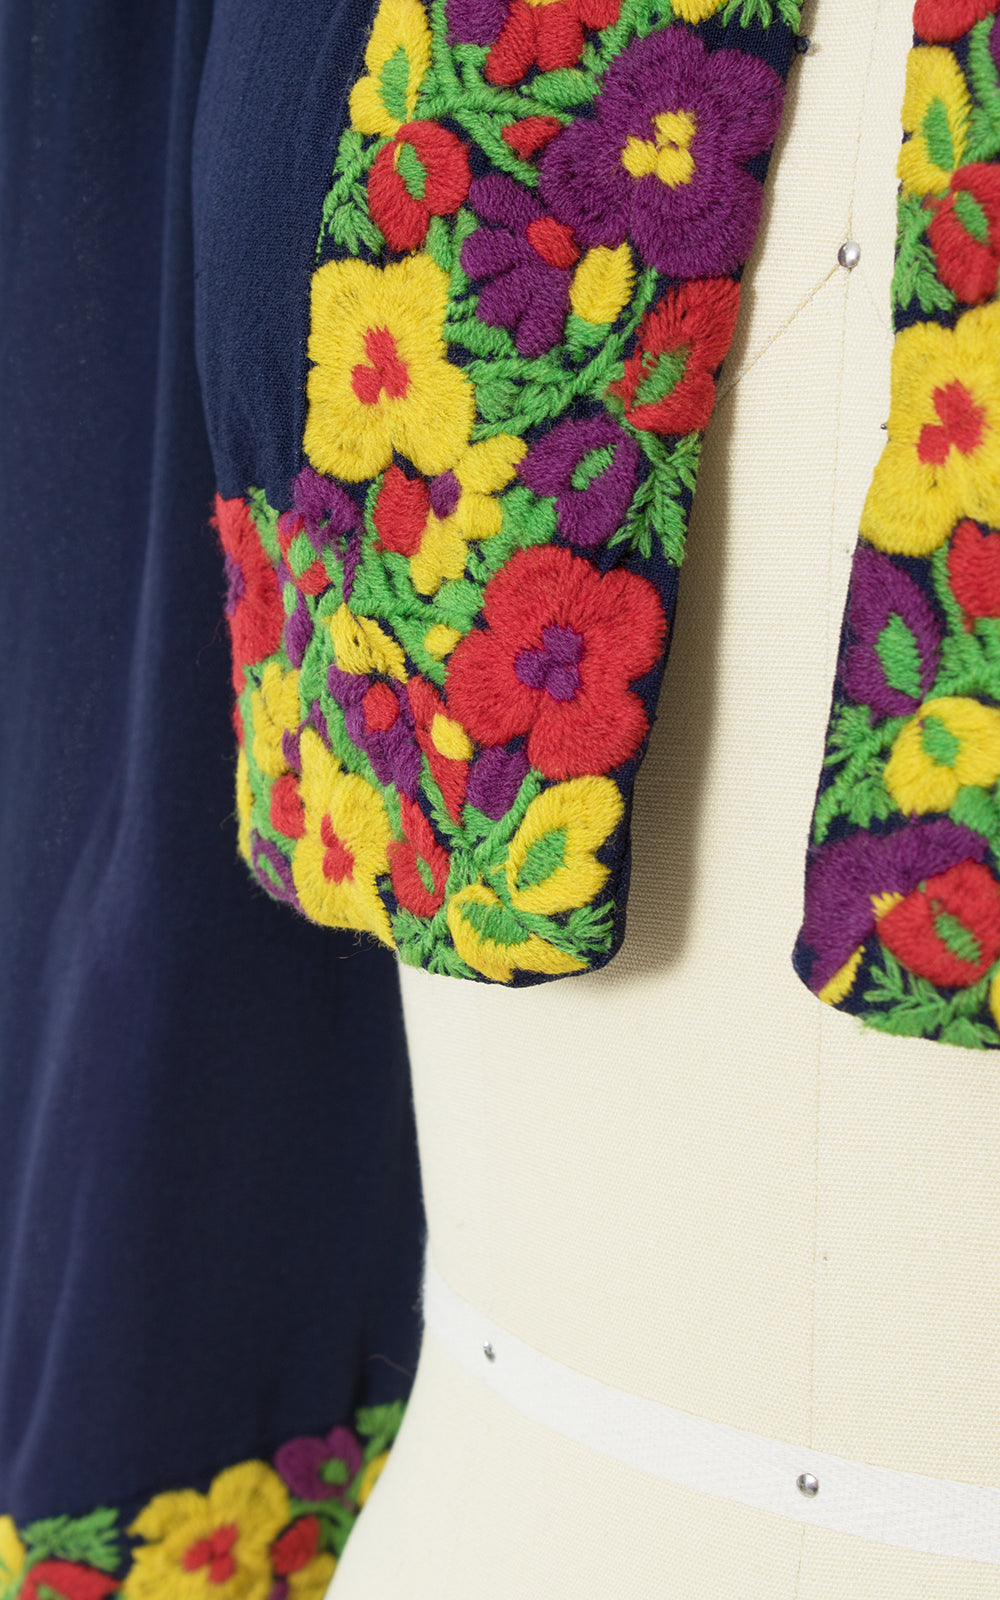 1930s Floral Embroidered Navy Blue Rayon Bolero Jacket